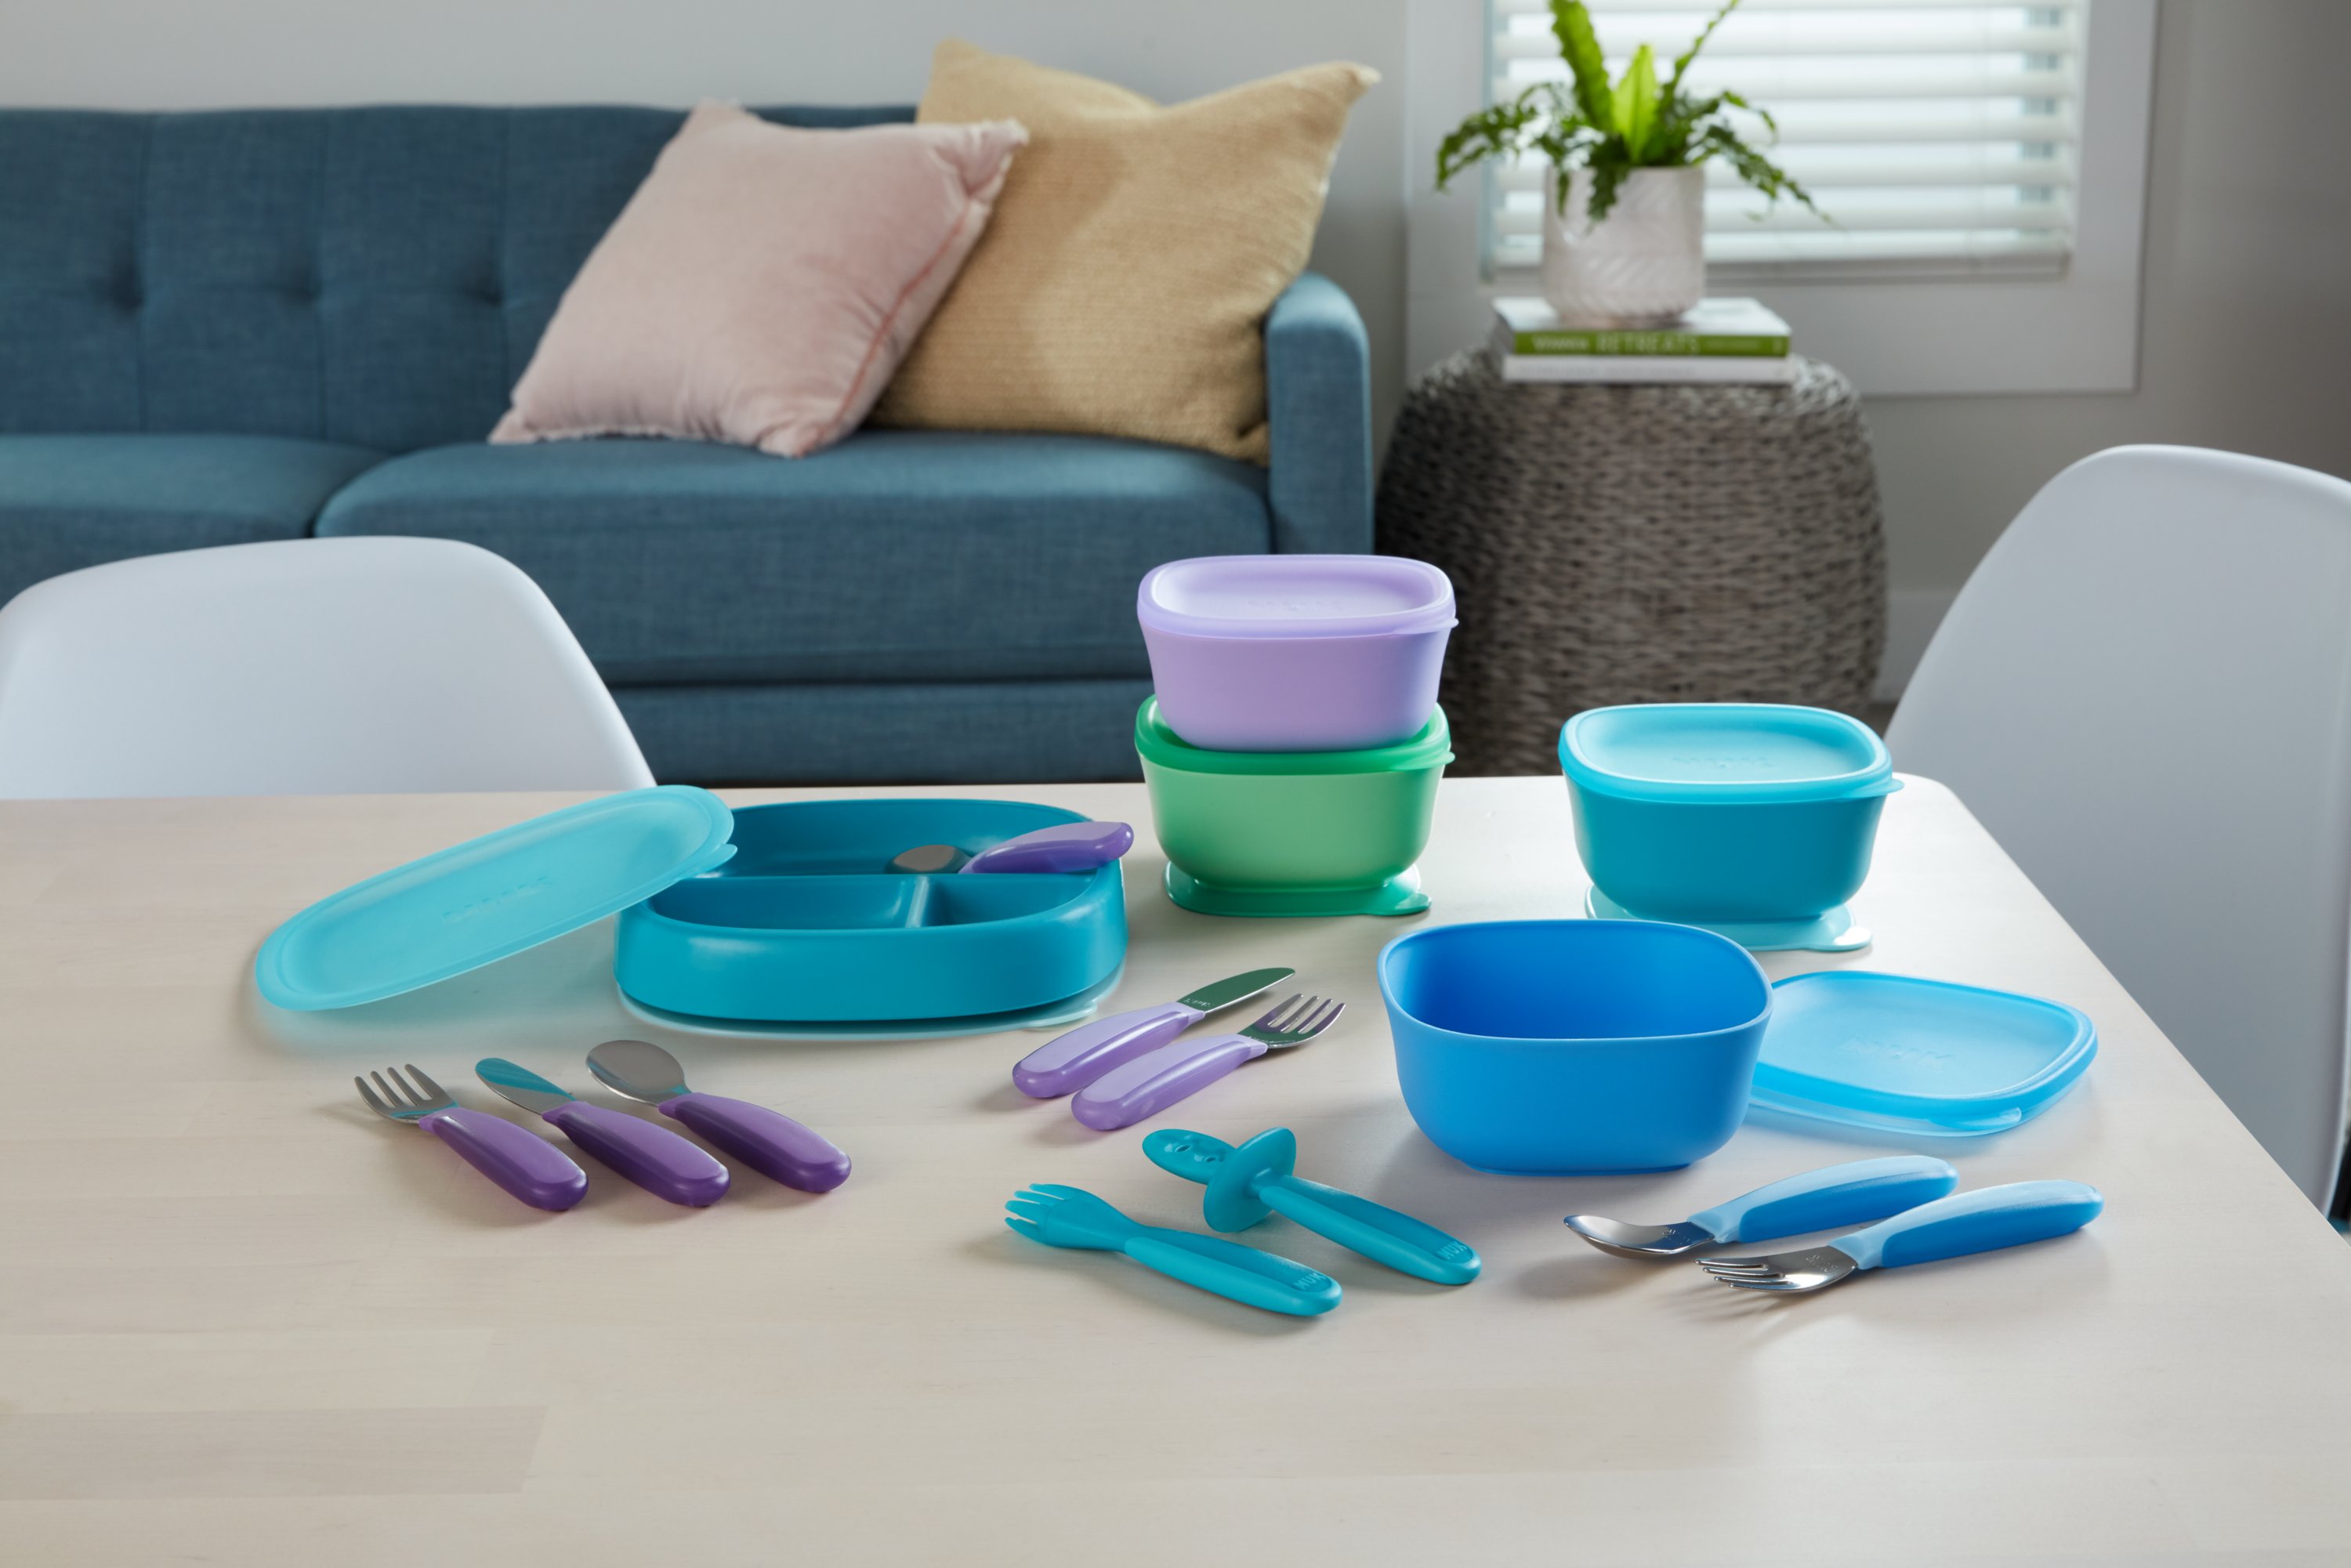 https://s7d9.scene7.com/is/image/NewellRubbermaid/NUK_Tabelware_Family_Product_Shot_No%20Food_0027